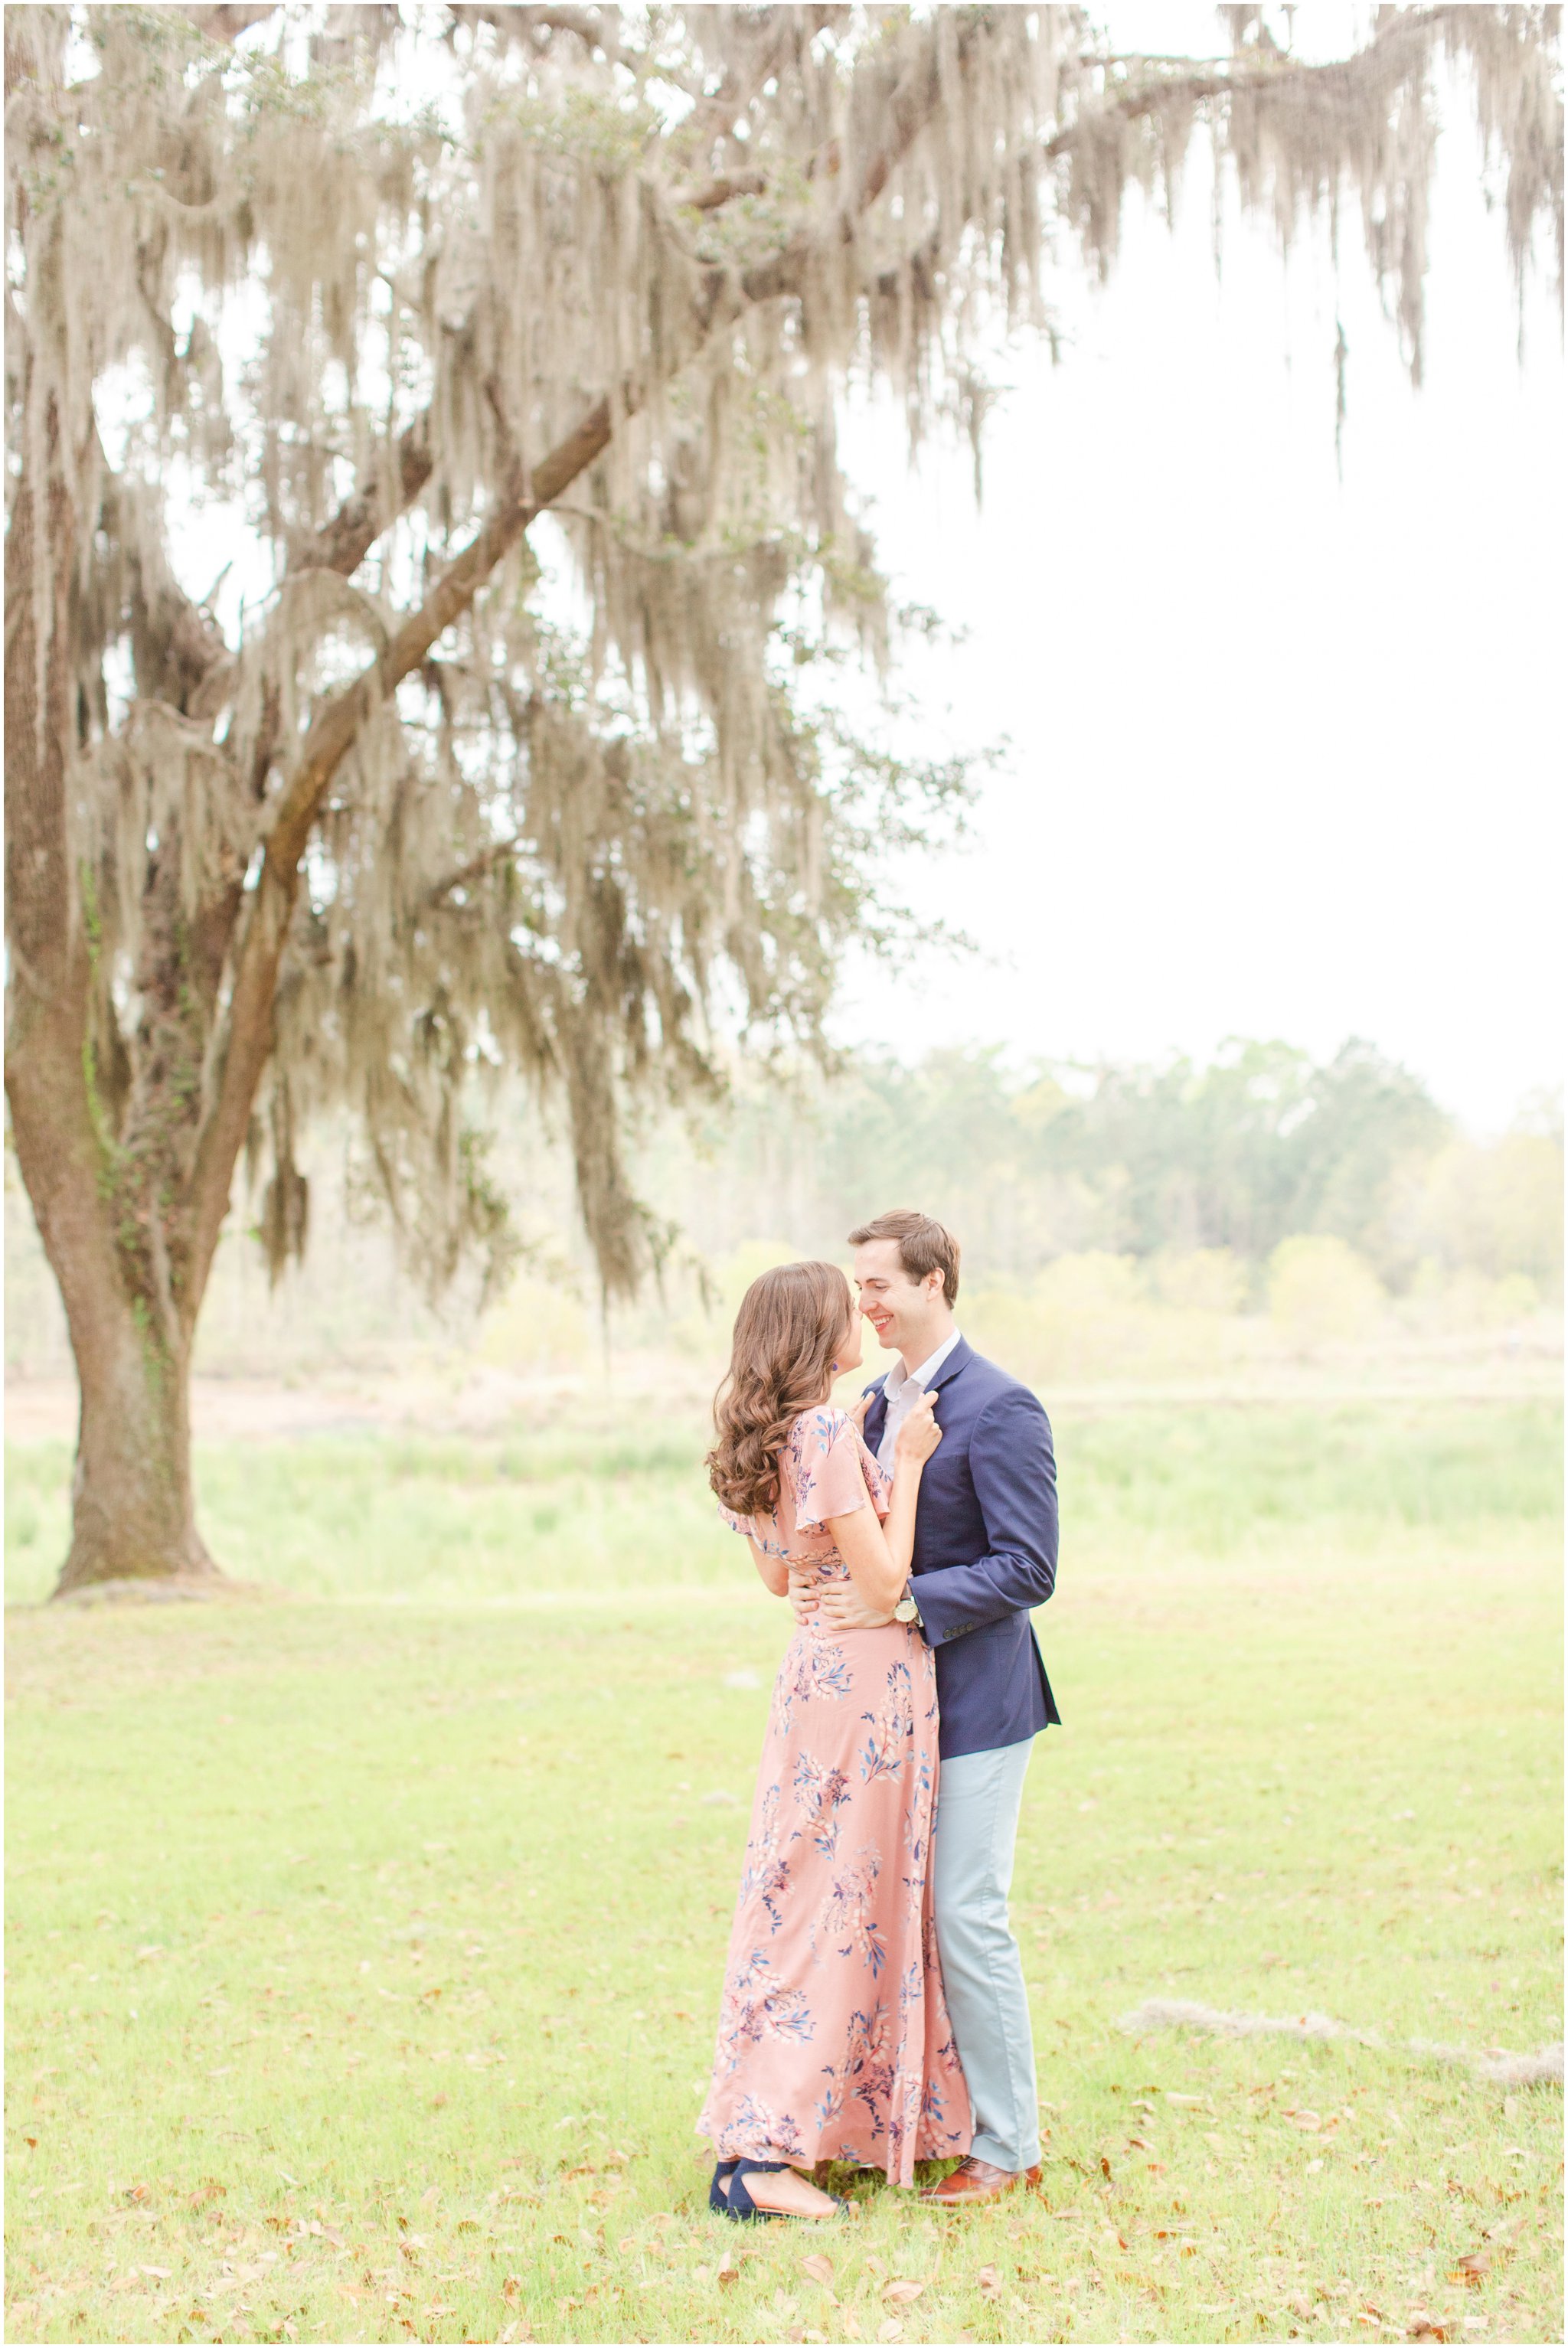 Savannah engagement session at Delta Plantation by Christa Rene Photography